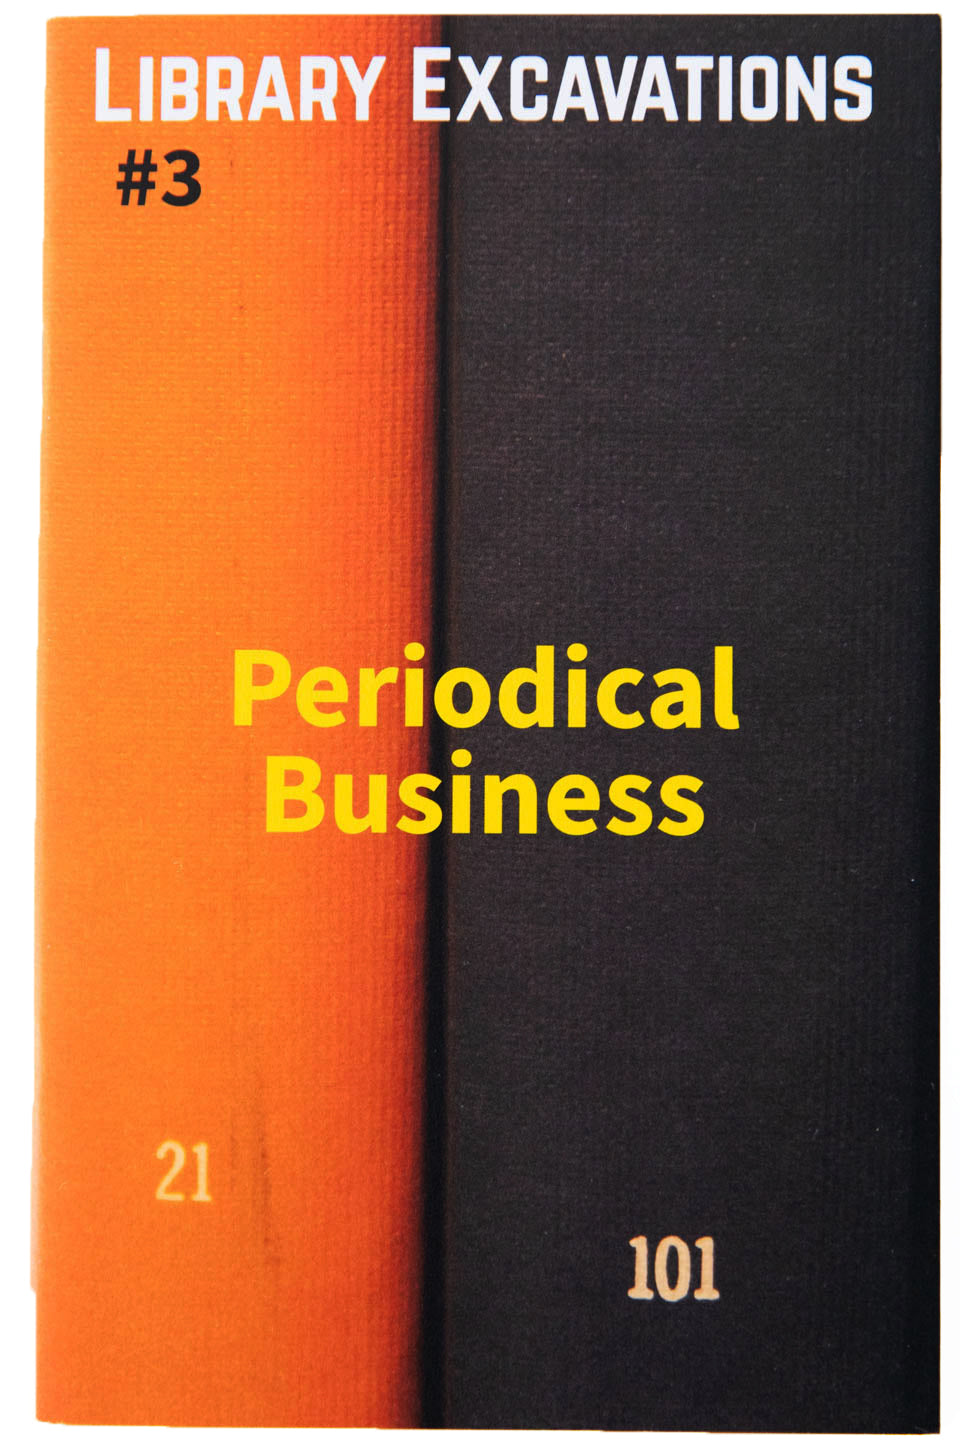 LIBRARY EXCAVATIONS #3 | Periodical Business